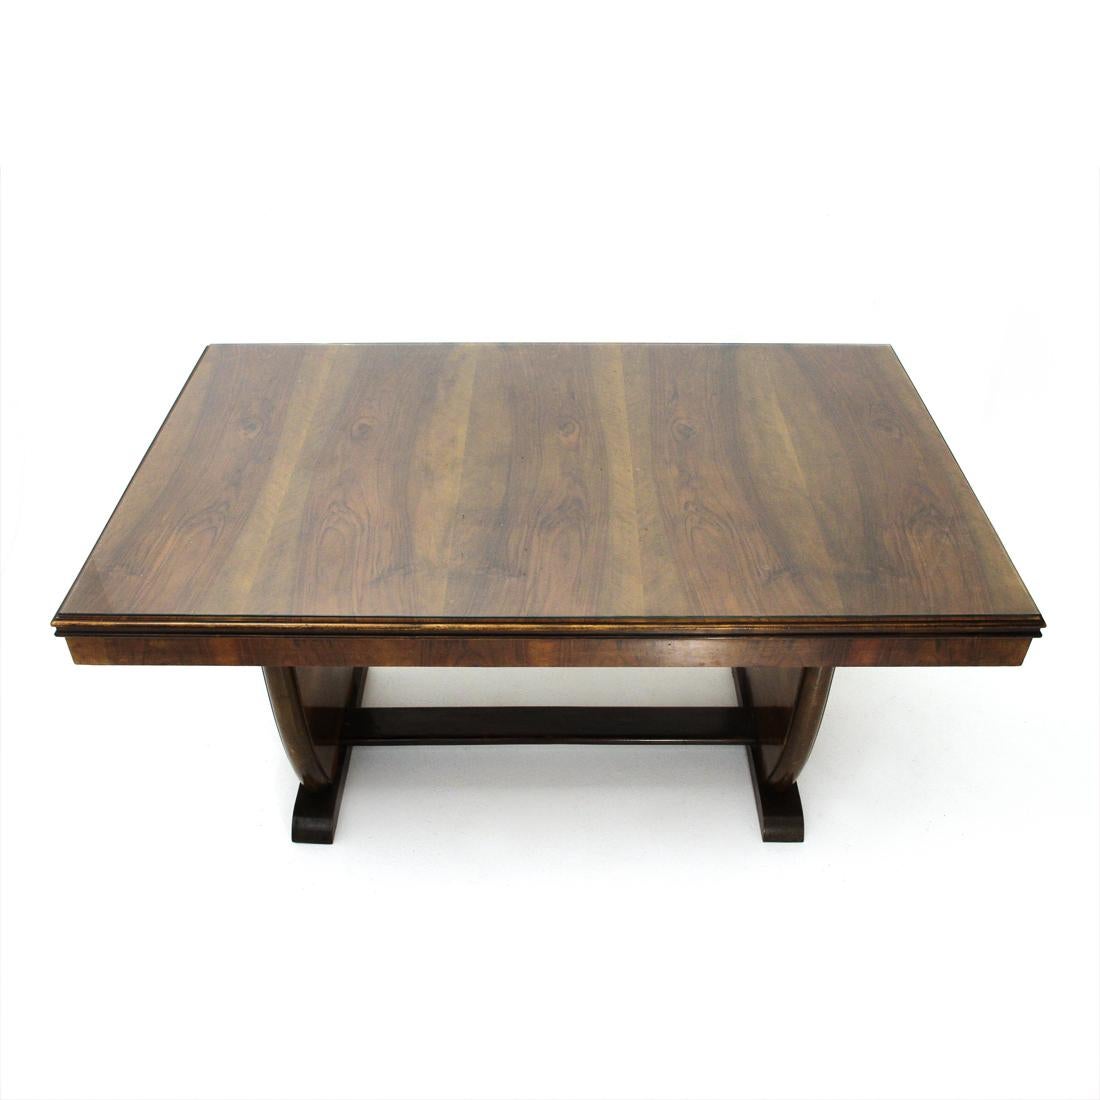 Glass Italian Wooden Dining Table, 1940s For Sale